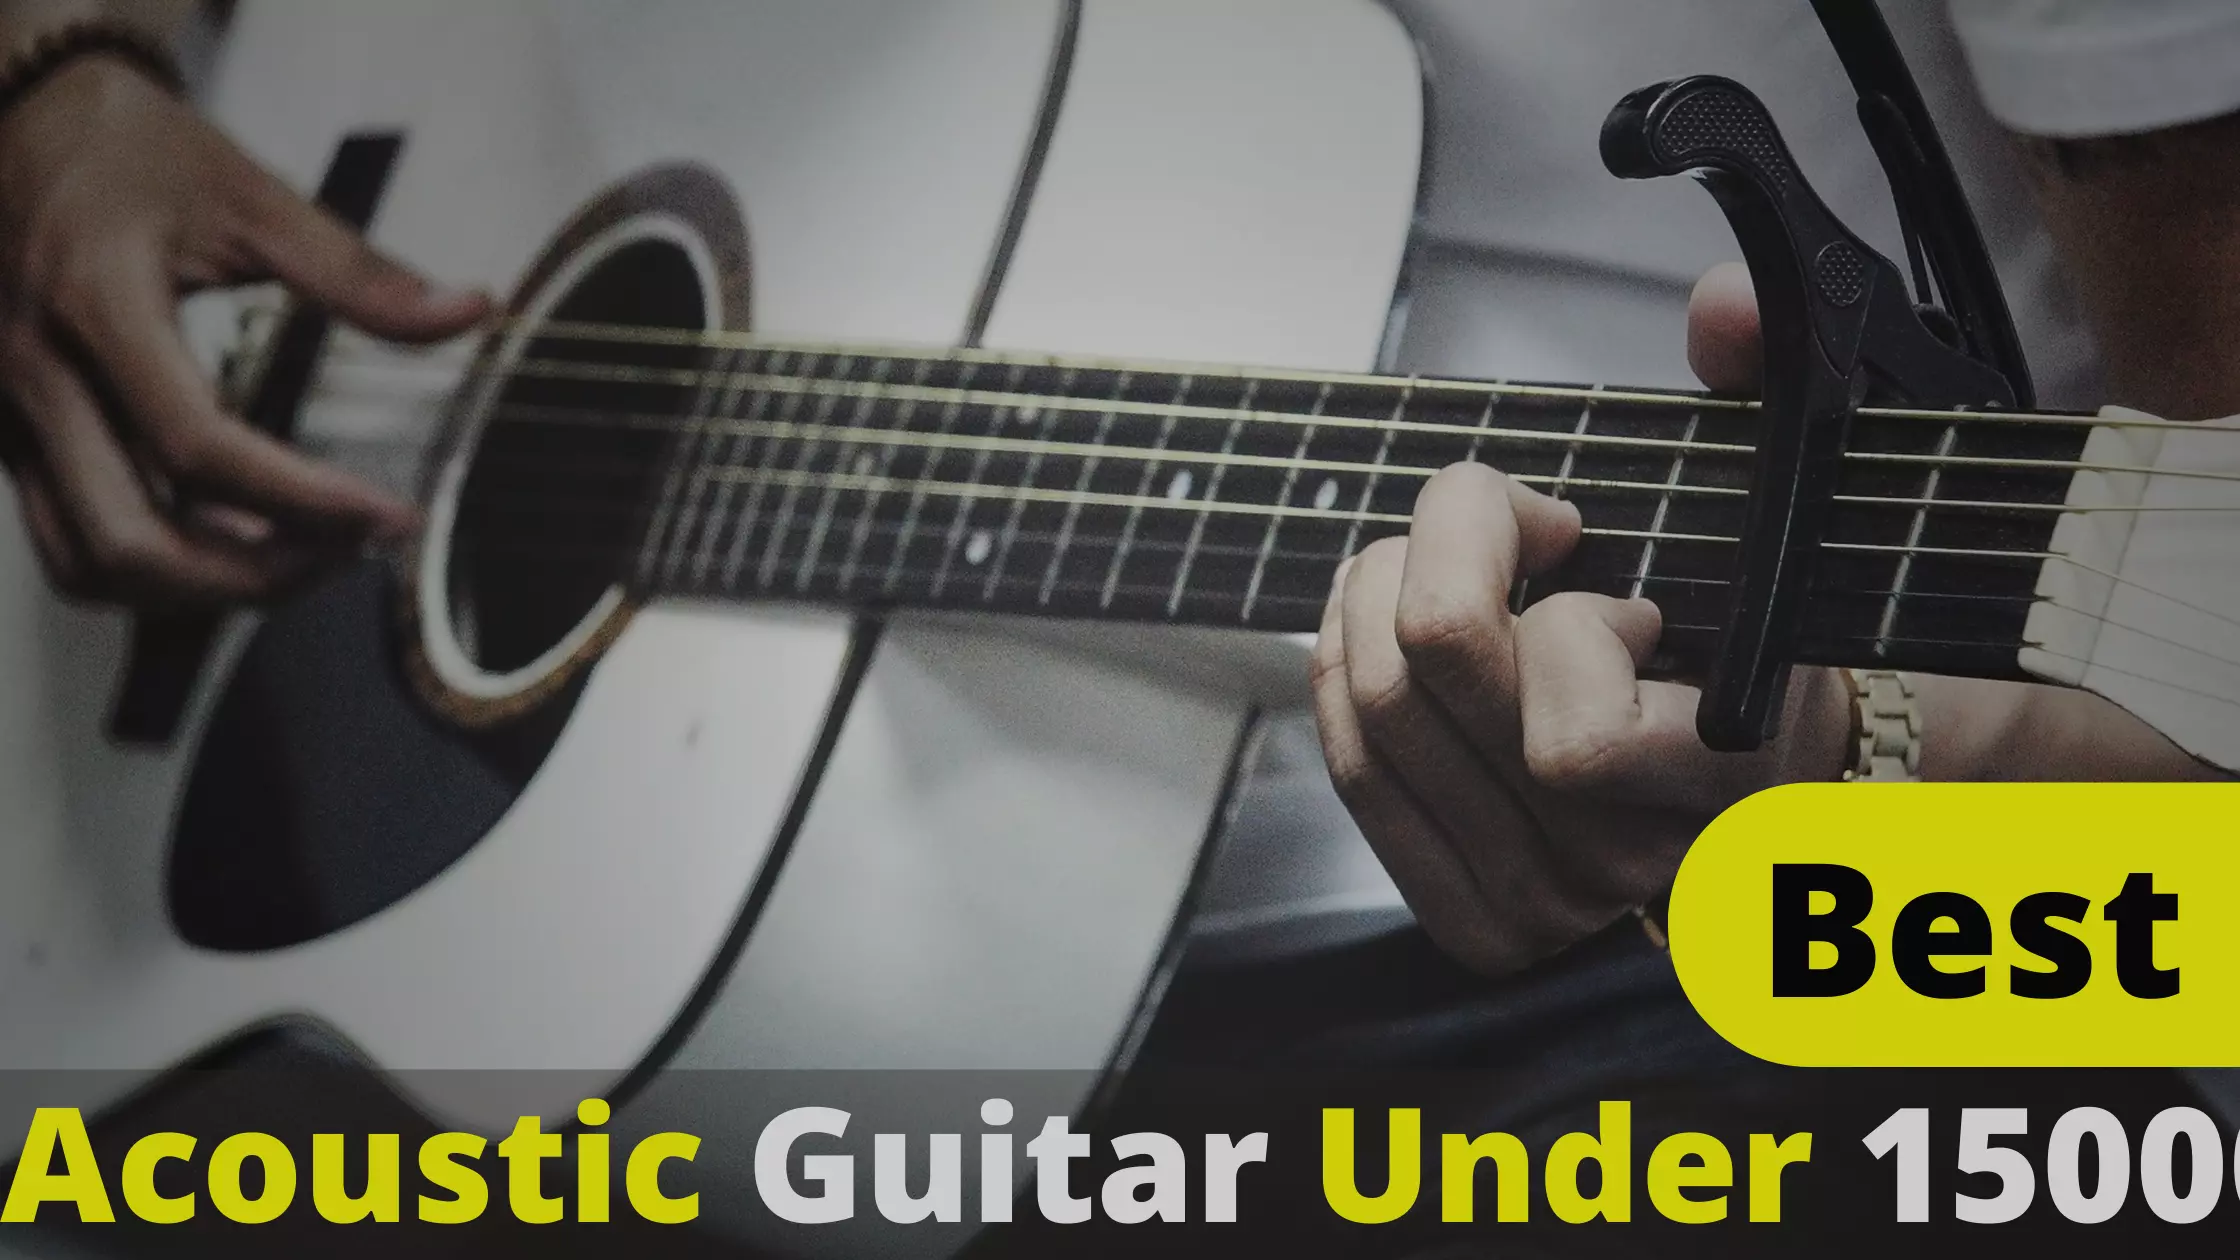 Best Acoustic Guitar Under 1500 - Review and Buying Guide